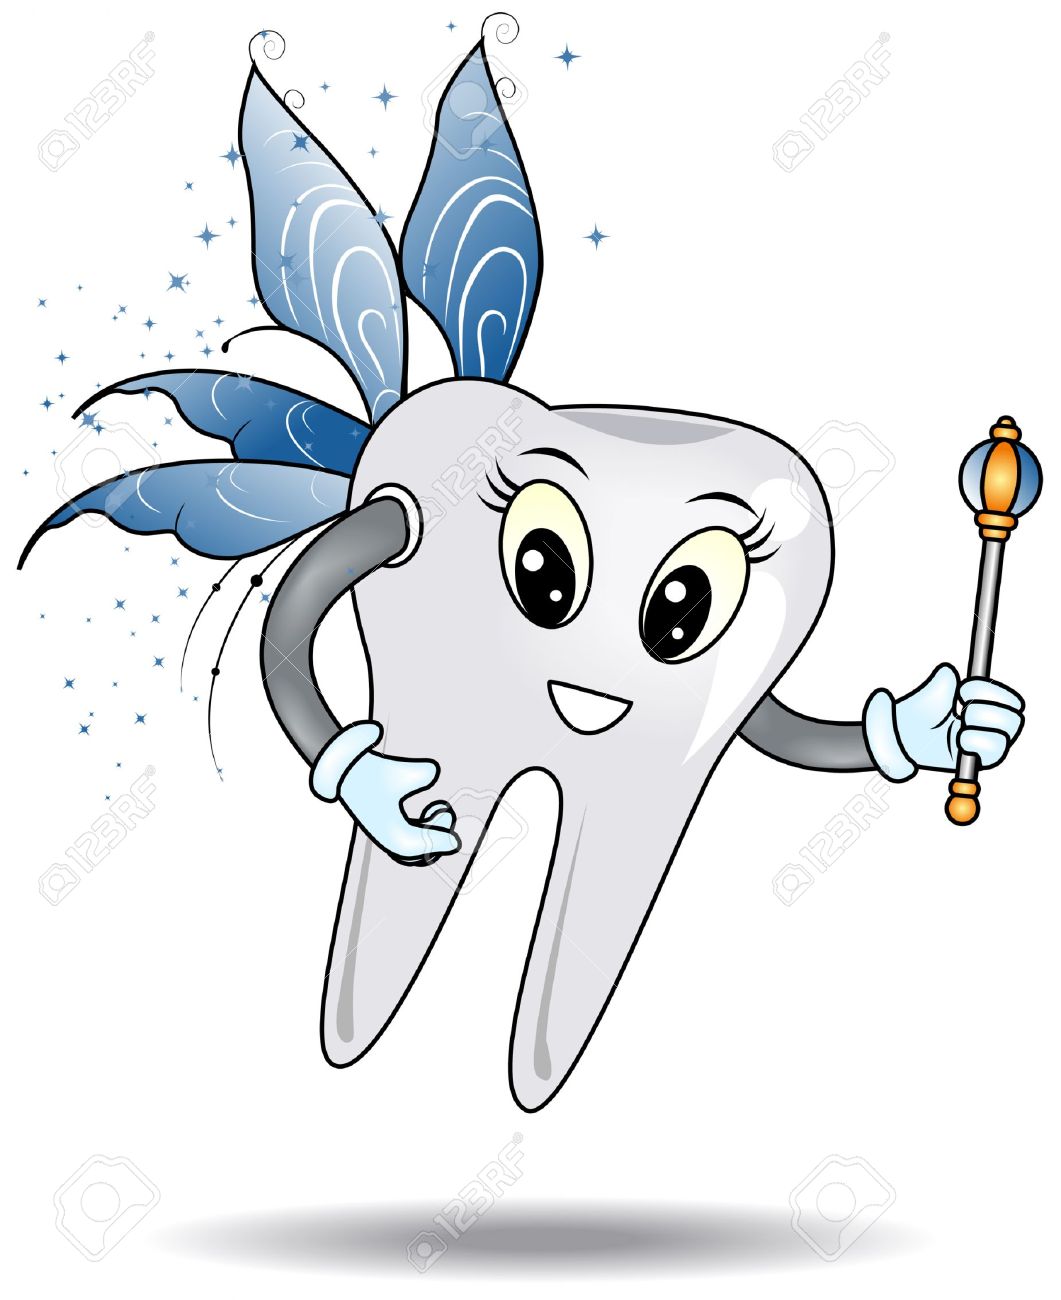 Tooth fairy clipart 2. Tooth Fairy with Clipping Path Stock Vector - 3699154